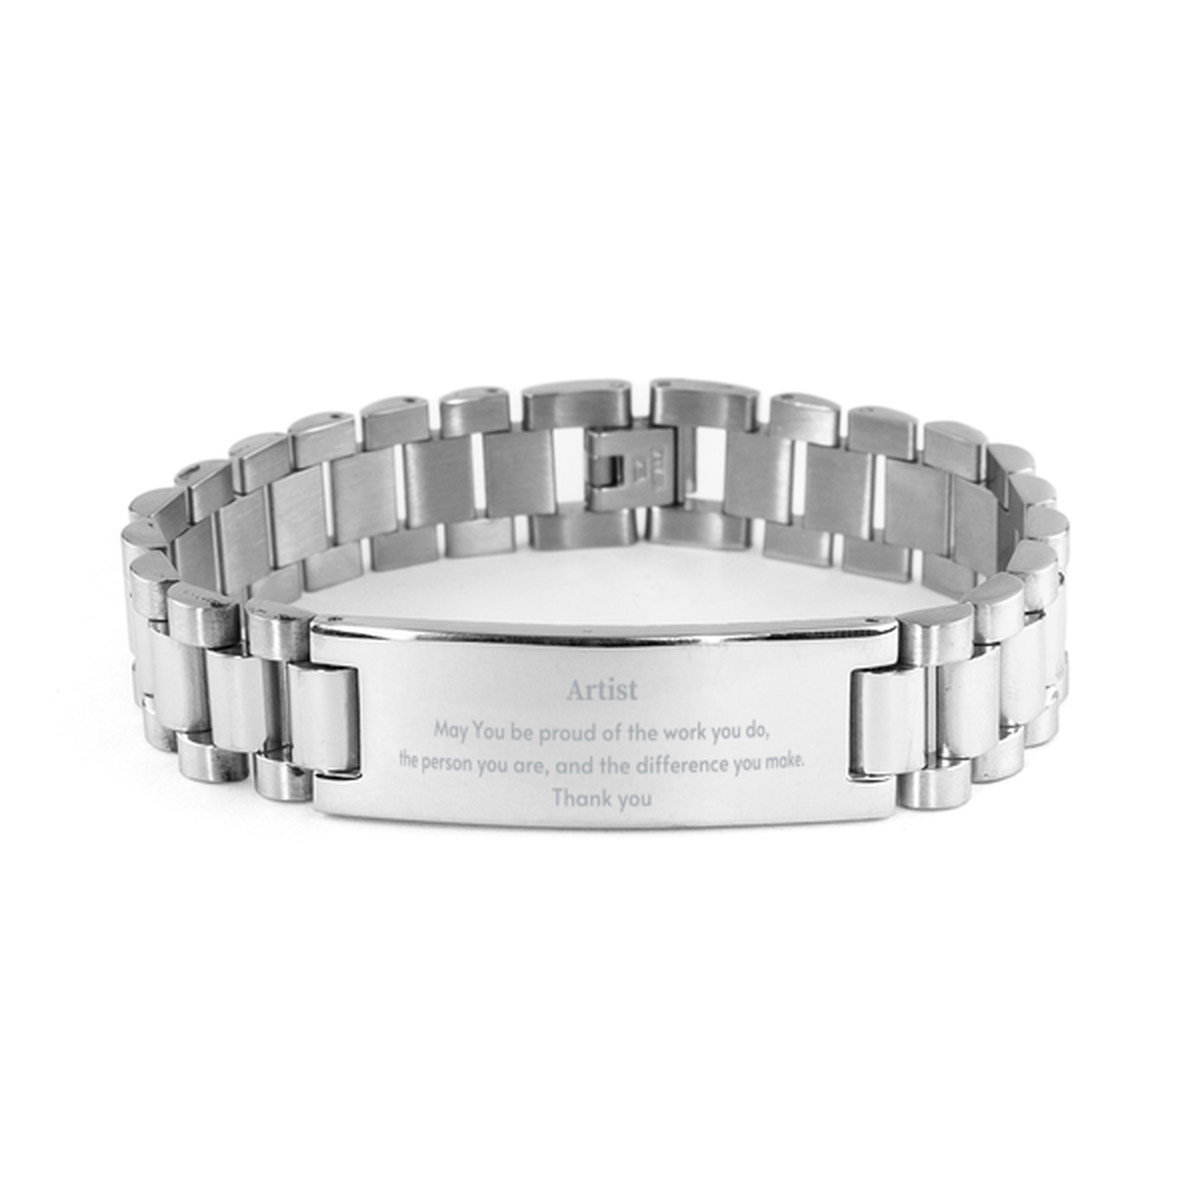 Heartwarming Ladder Stainless Steel Bracelet Retirement Coworkers Gifts for Artist, Artist May You be proud of the work you do, the person you are Gifts for Boss Men Women Friends